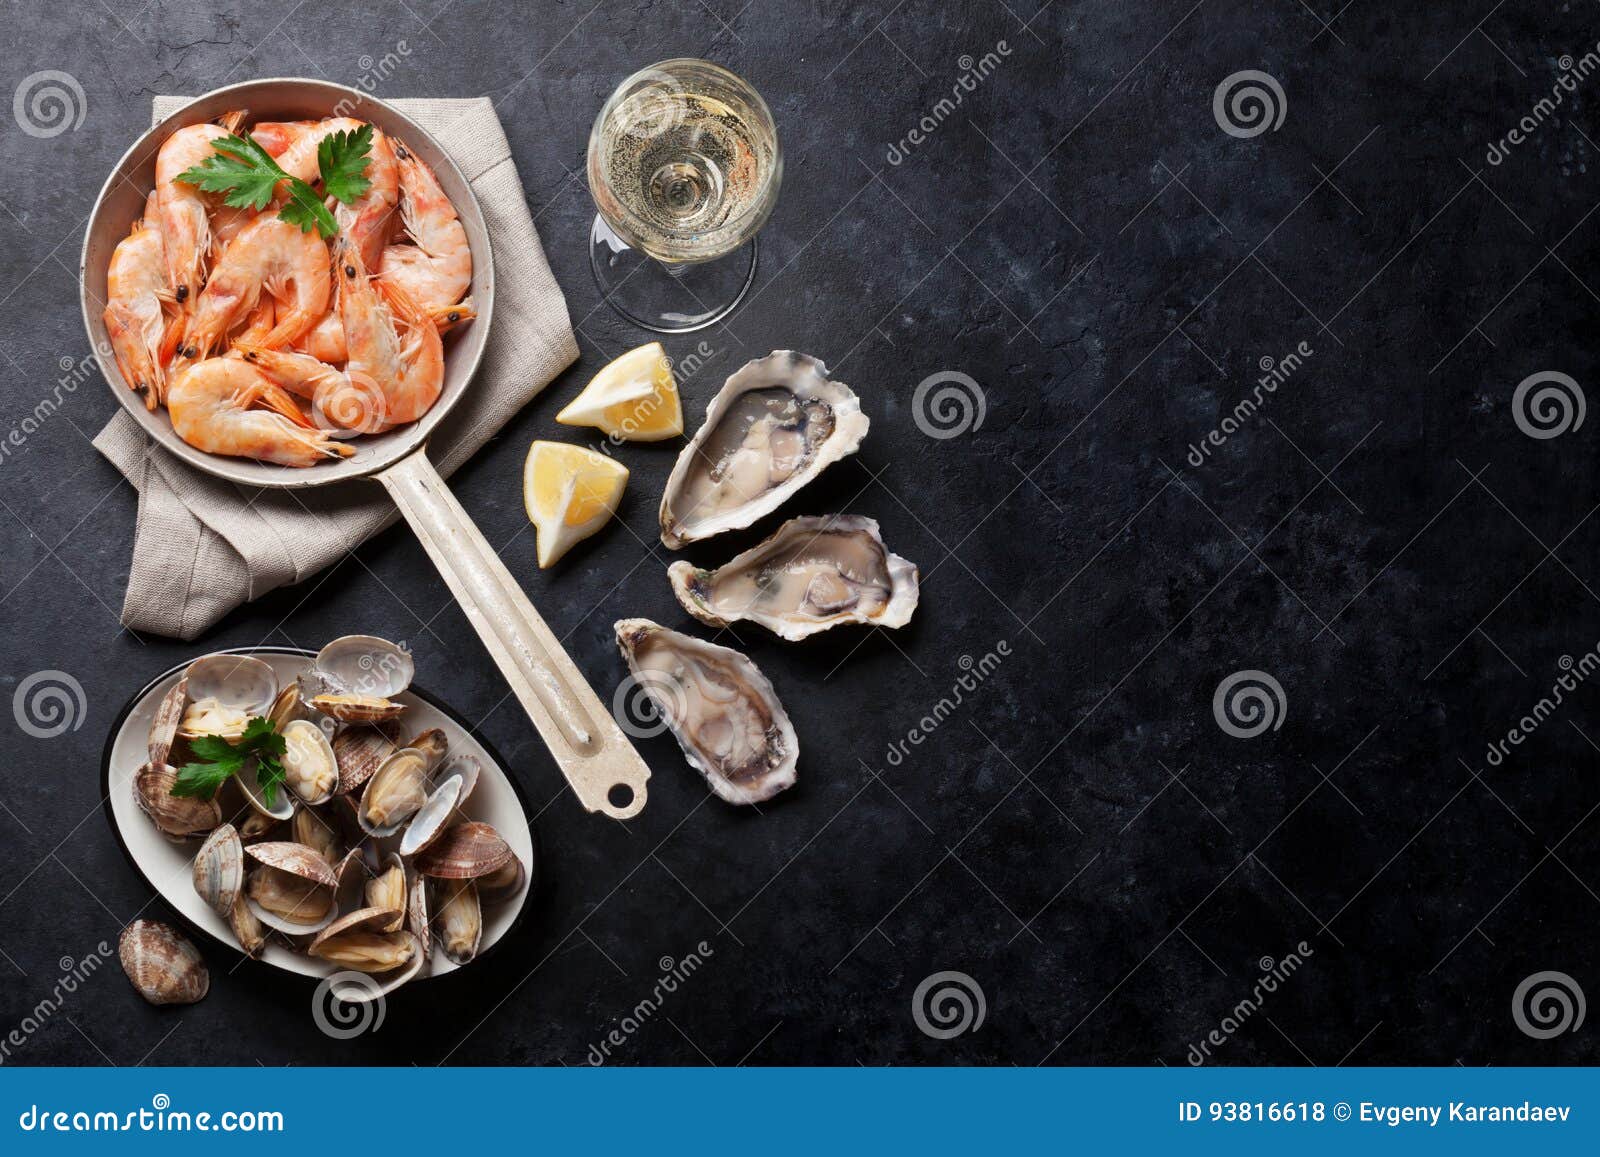 fresh seafood and white wine. scallops, oysters and shrimps